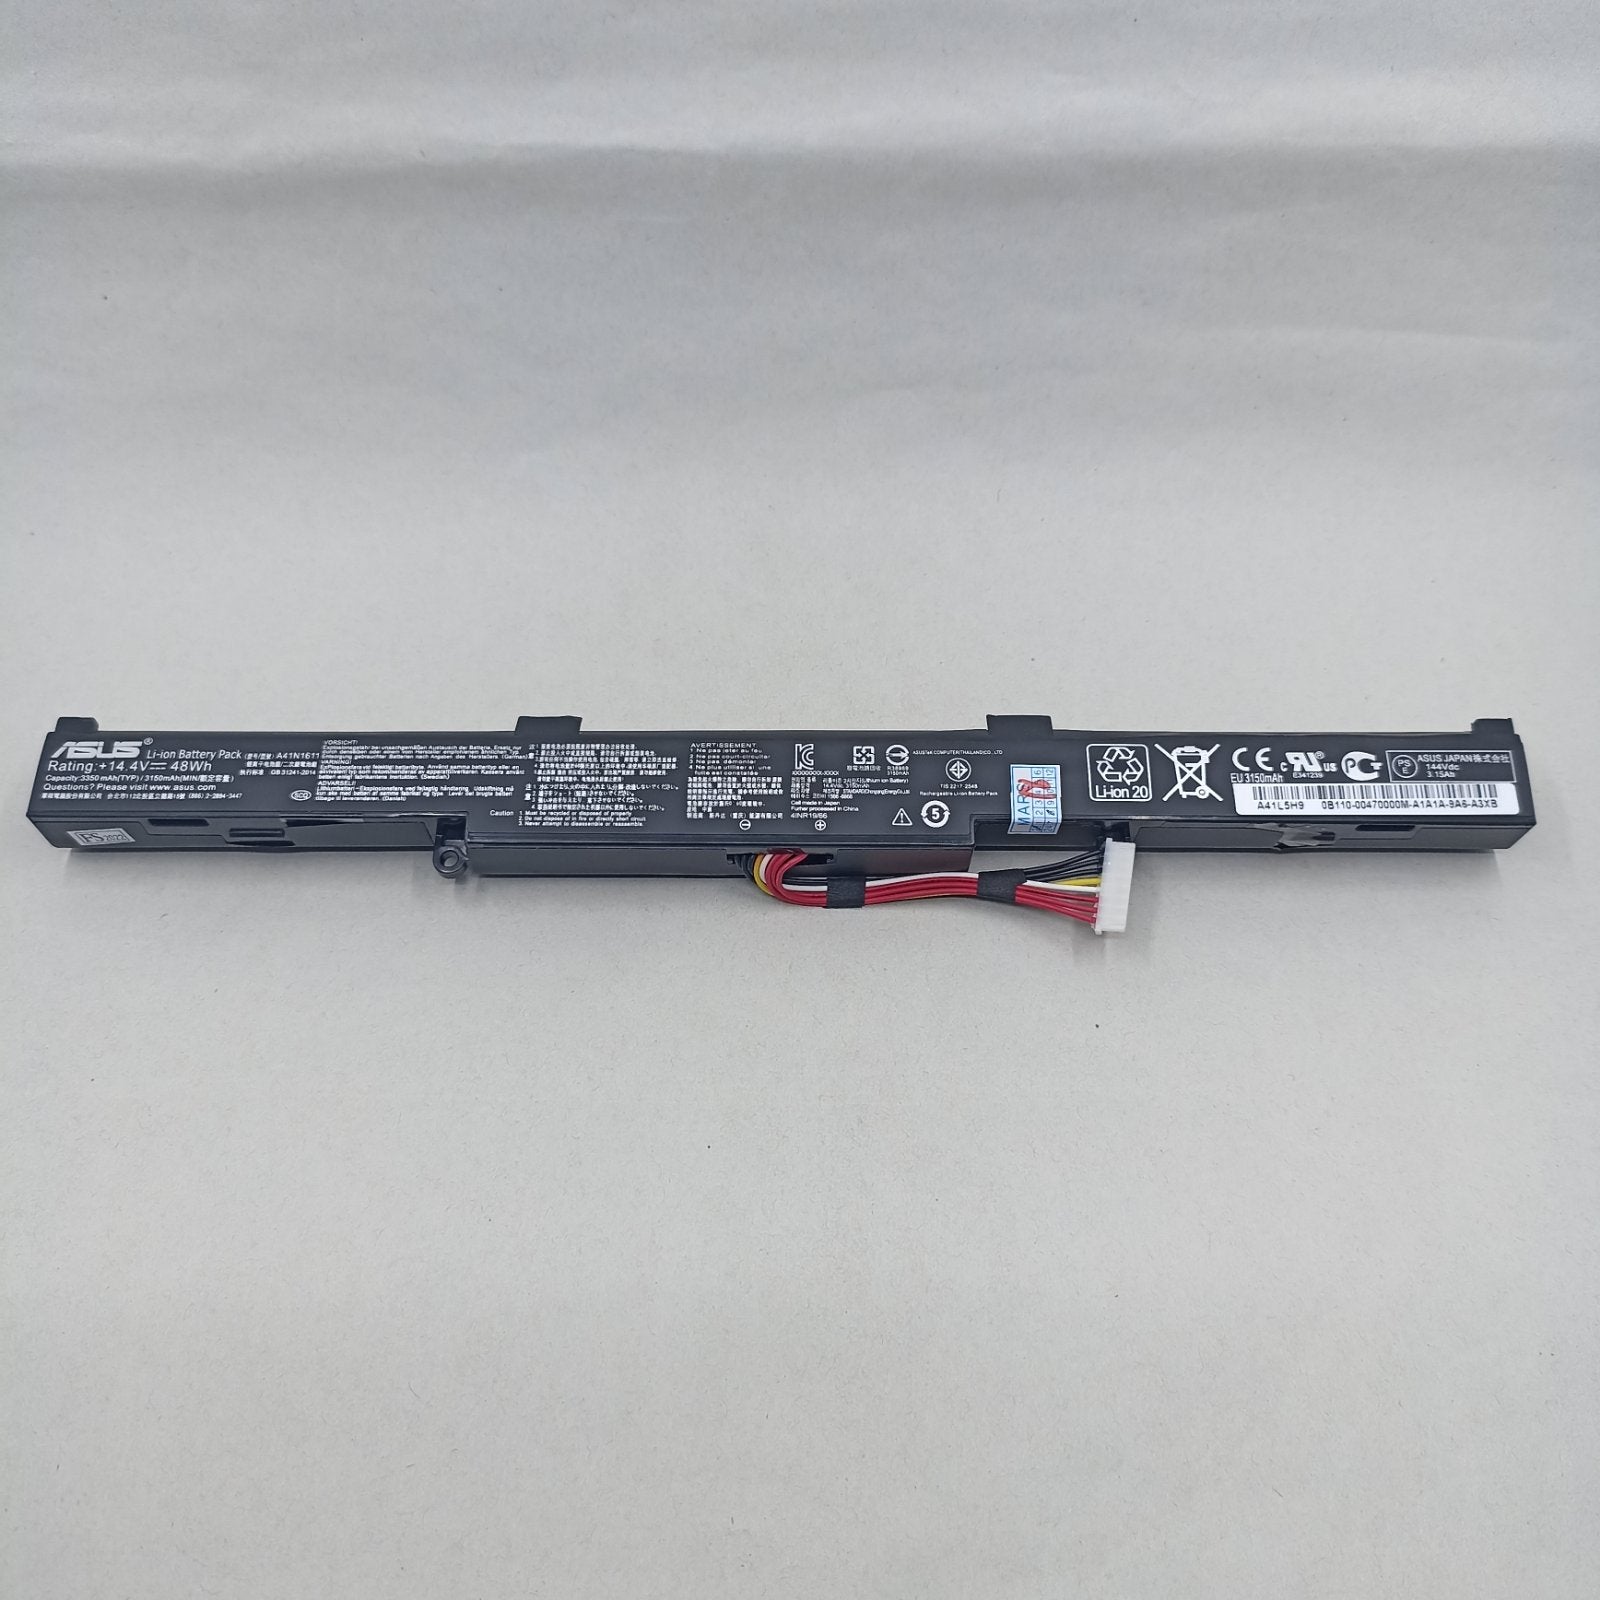 Replacement Battery for Asus GL553VD A1